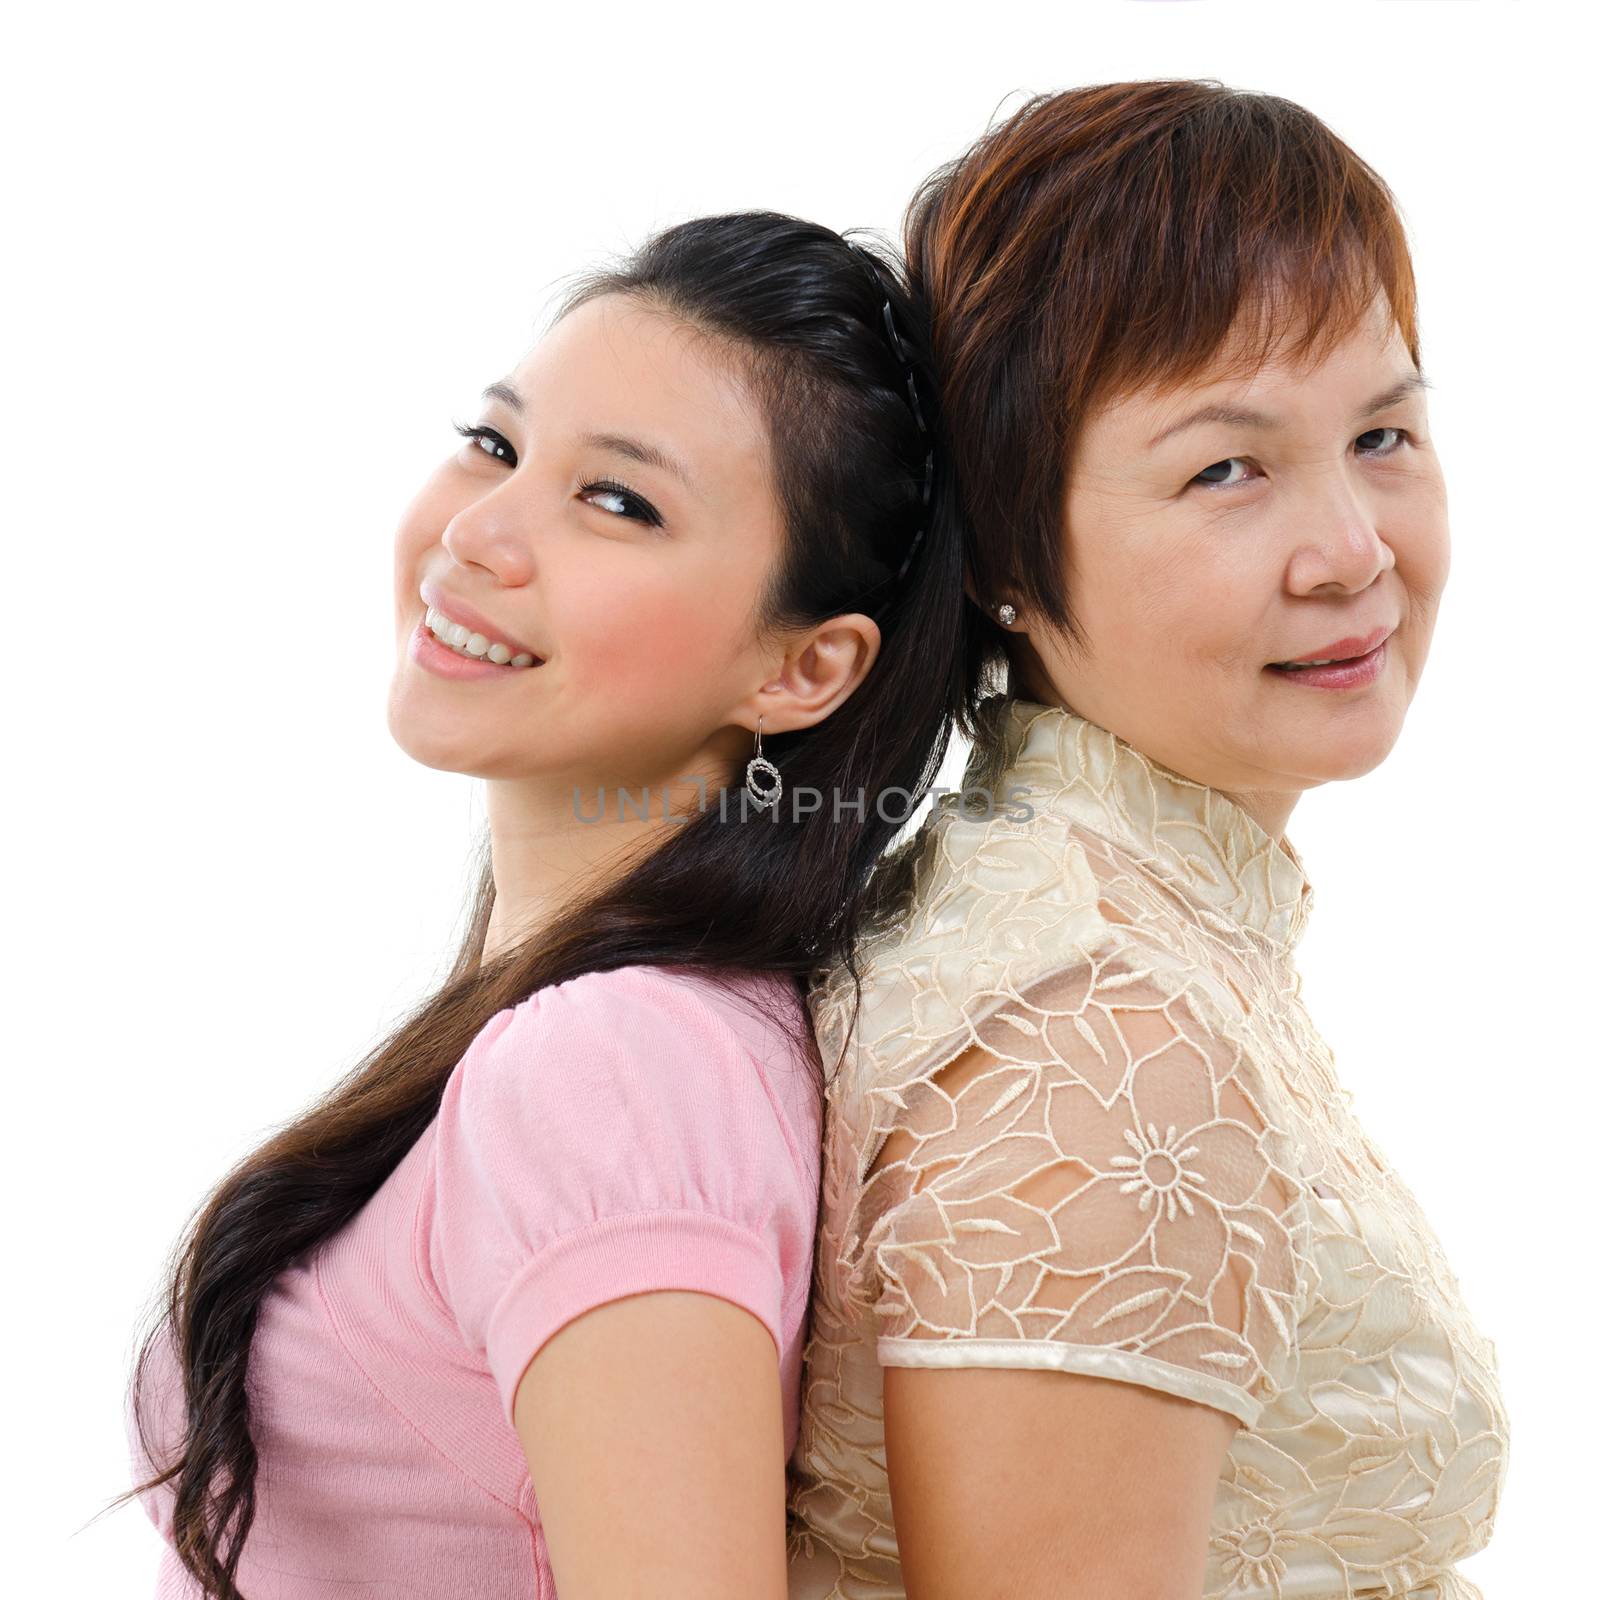 Adult daughter back to back with mother isolated on white background. Mixed race Asian family portrait. 